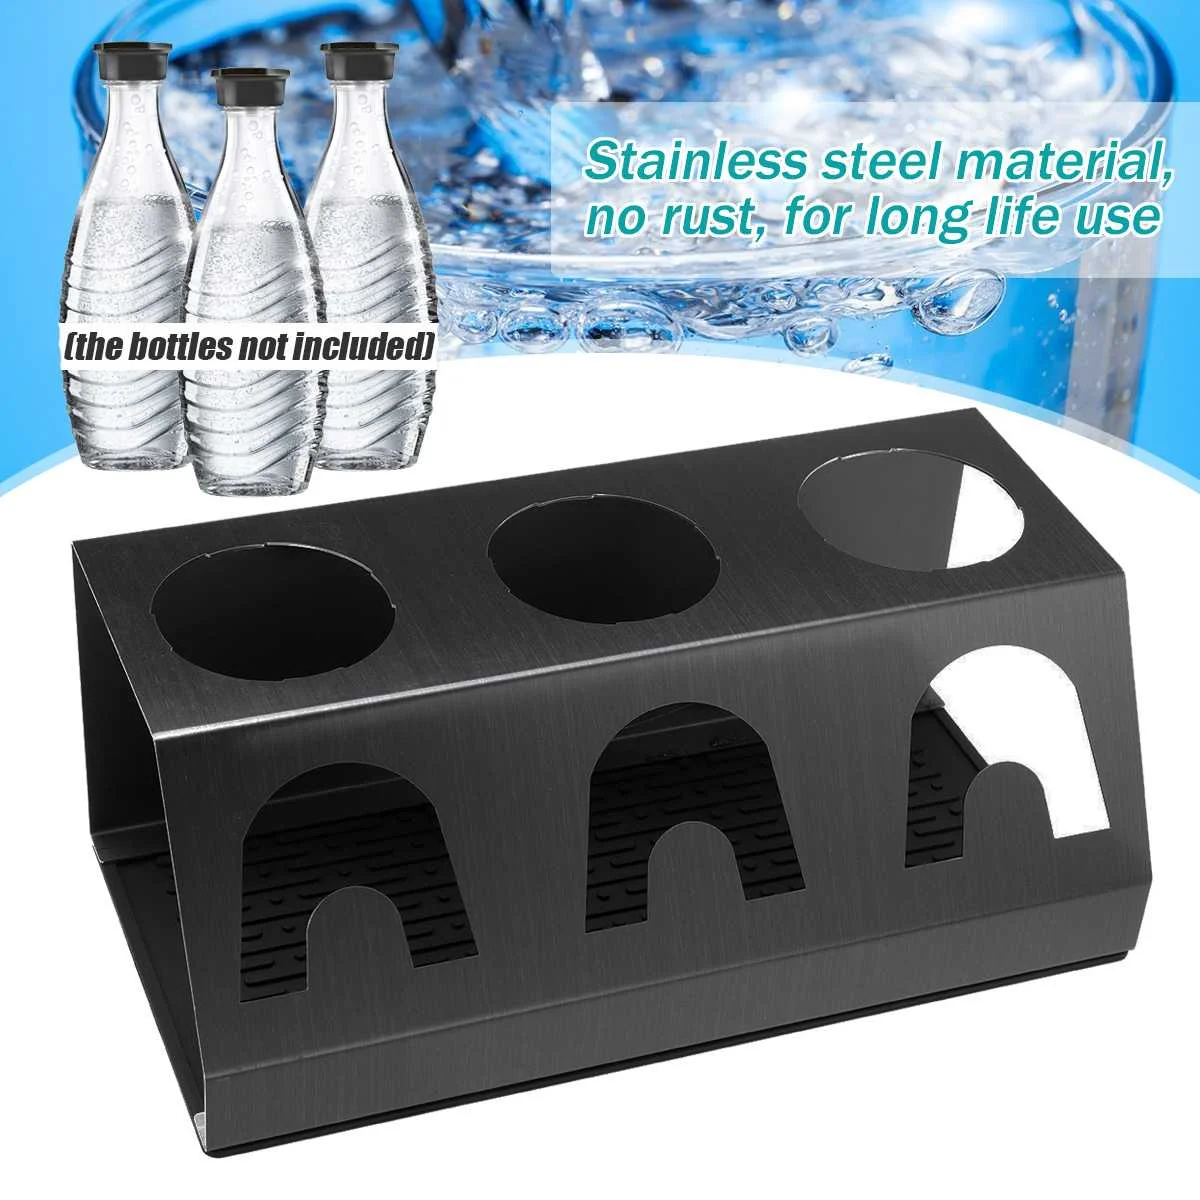 

Kitchen Dining Room Dual Holes Draining Rack Soda Bottles Dish Sodastreams Drainer Holder with Pad for Household Bottles Storage